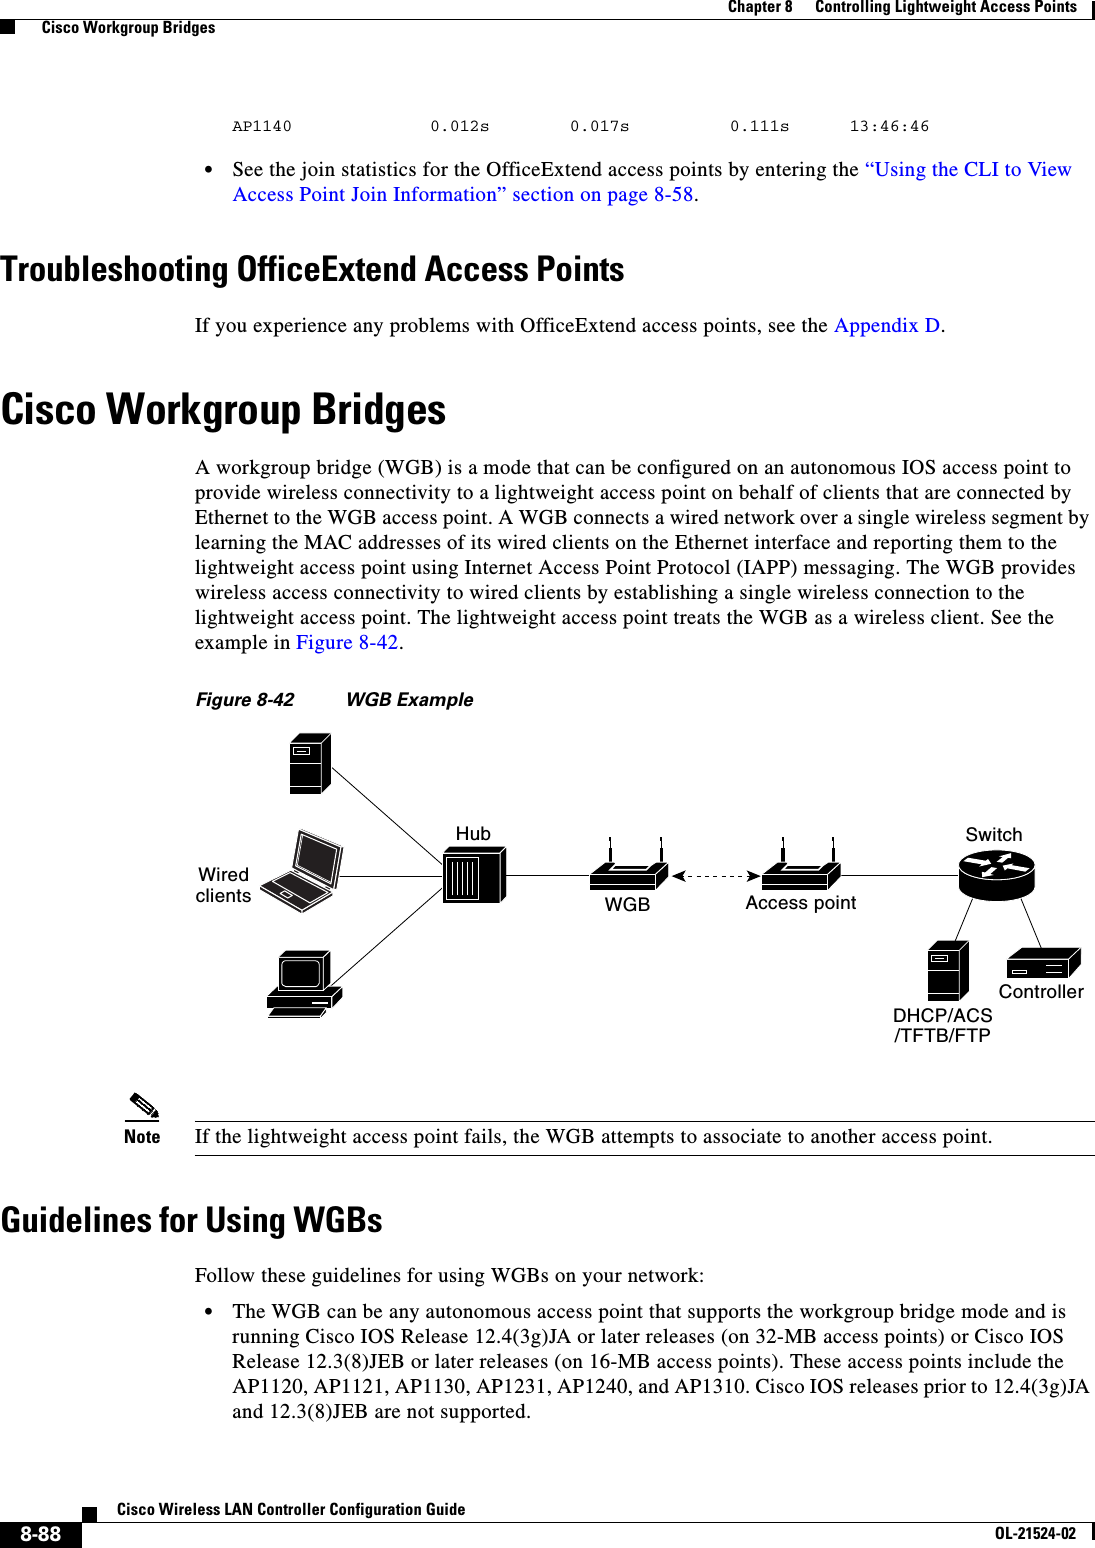  8-88Cisco Wireless LAN Controller Configuration GuideOL-21524-02Chapter 8      Controlling Lightweight Access Points  Cisco Workgroup BridgesAP1140  0.012s  0.017s          0.111s      13:46:46   • See the join statistics for the OfficeExtend access points by entering the “Using the CLI to View Access Point Join Information” section on page 8-58.Troubleshooting OfficeExtend Access PointsIf you experience any problems with OfficeExtend access points, see the Appendix D.Cisco Workgroup BridgesA workgroup bridge (WGB) is a mode that can be configured on an autonomous IOS access point to provide wireless connectivity to a lightweight access point on behalf of clients that are connected by Ethernet to the WGB access point. A WGB connects a wired network over a single wireless segment by learning the MAC addresses of its wired clients on the Ethernet interface and reporting them to the lightweight access point using Internet Access Point Protocol (IAPP) messaging. The WGB provides wireless access connectivity to wired clients by establishing a single wireless connection to the lightweight access point. The lightweight access point treats the WGB as a wireless client. See the example in Figure 8-42.Figure 8-42 WGB ExampleNote If the lightweight access point fails, the WGB attempts to associate to another access point.Guidelines for Using WGBsFollow these guidelines for using WGBs on your network:  • The WGB can be any autonomous access point that supports the workgroup bridge mode and is running Cisco IOS Release 12.4(3g)JA or later releases (on 32-MB access points) or Cisco IOS Release 12.3(8)JEB or later releases (on 16-MB access points). These access points include the AP1120, AP1121, AP1130, AP1231, AP1240, and AP1310. Cisco IOS releases prior to 12.4(3g)JA and 12.3(8)JEB are not supported.WiredclientsControllerAccess pointWGBHubDHCP/ACS/TFTB/FTPSwitch